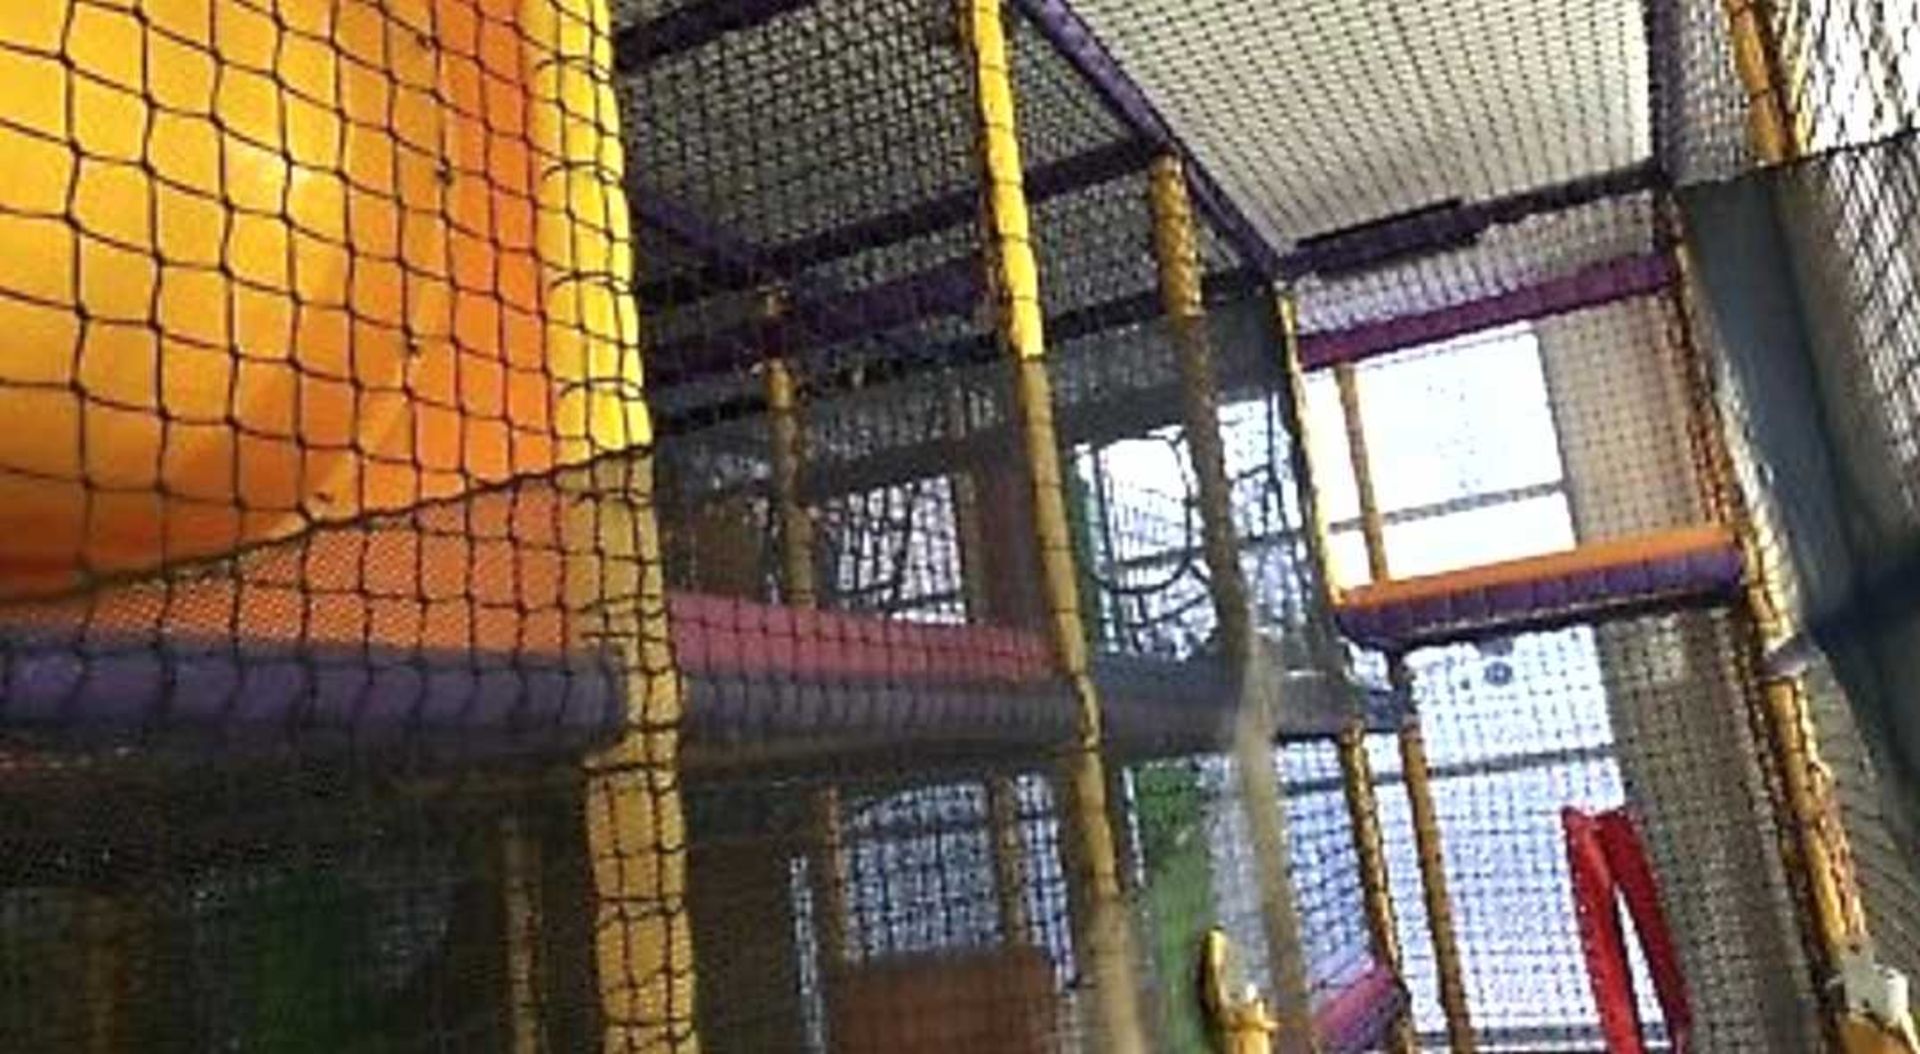 Play gym business - Image 6 of 8